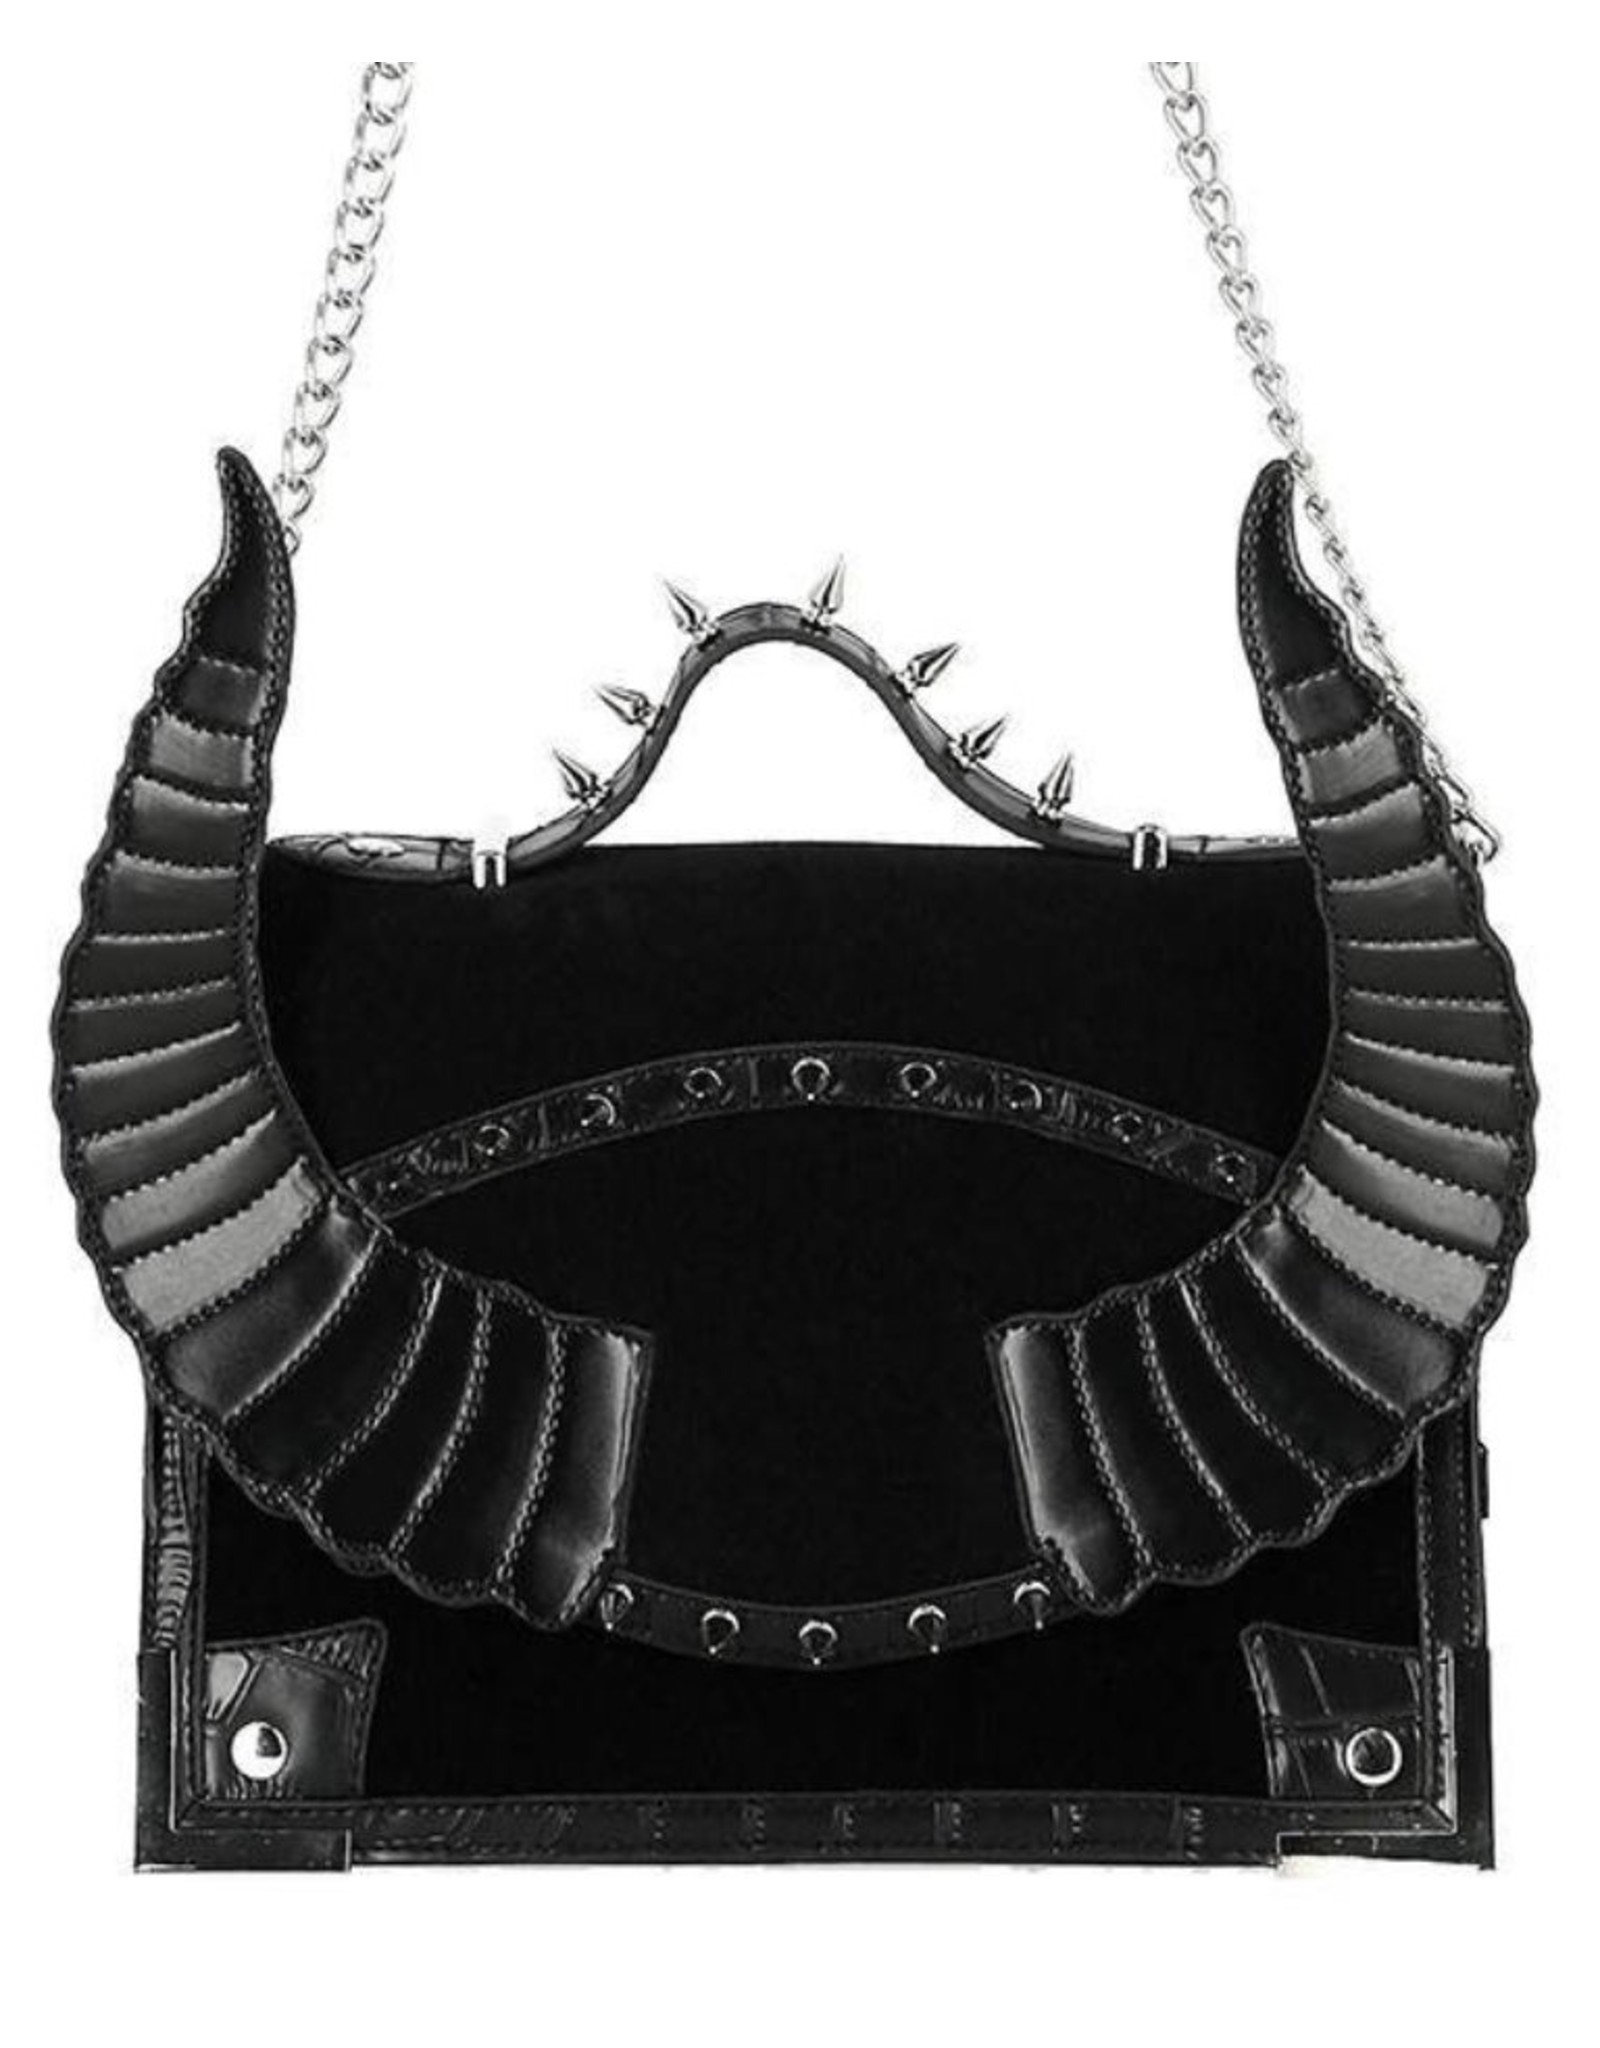 Restyle Gothic bags Steampunk bags - Black Diabolic Handag with spikes and Horns